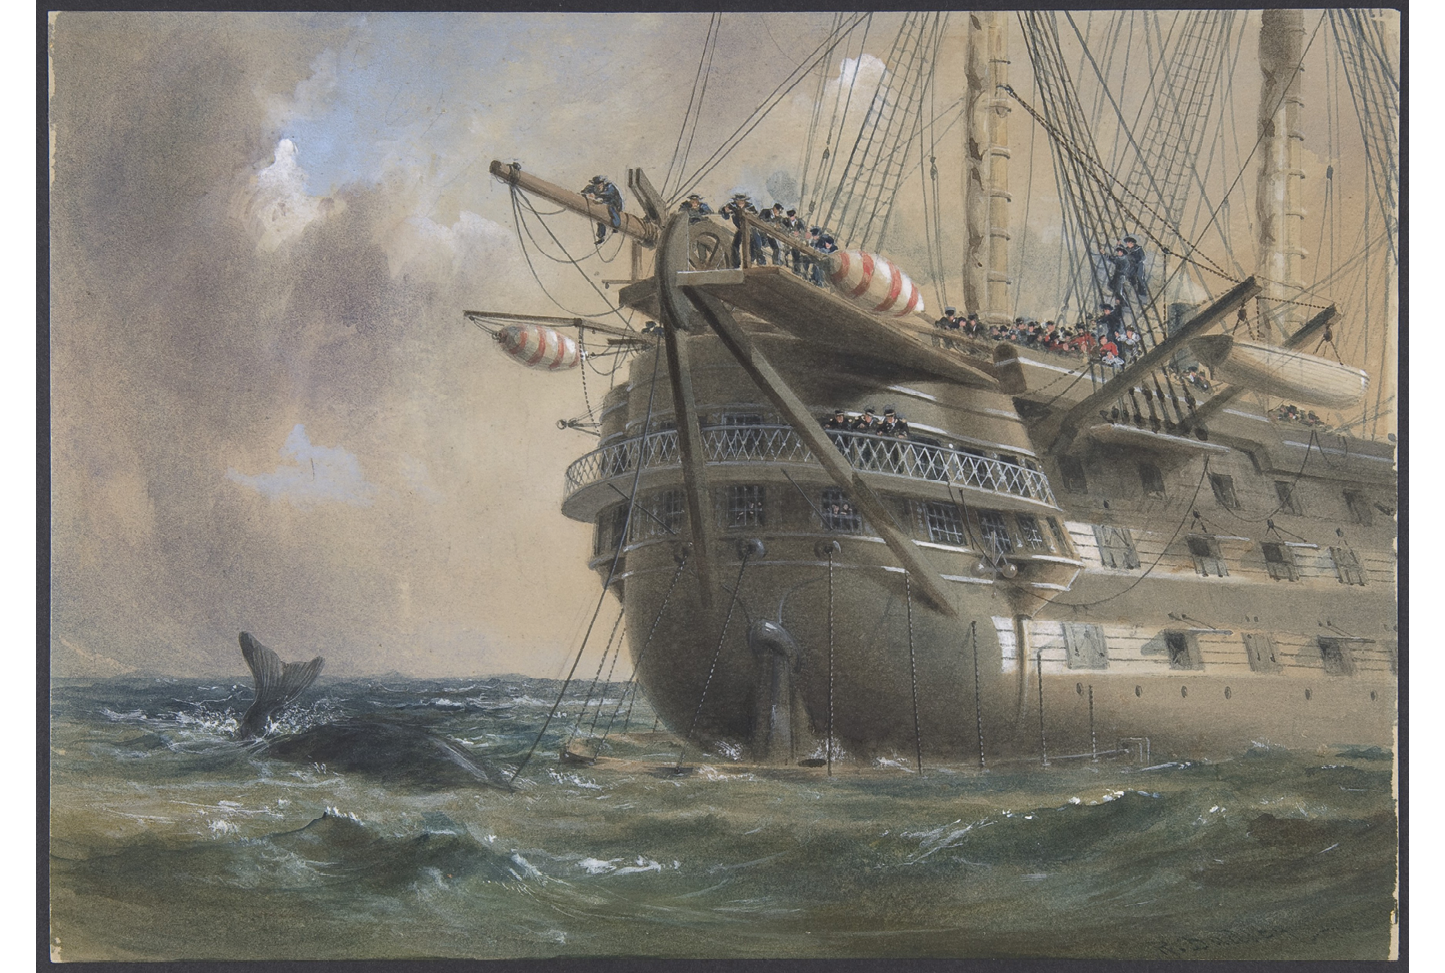 A watercolor painting: on the right, a group of sailors aboard a British transatlantic ship laying a telegraphic cable beneath the Atlantic Ocean; on the left, a whale swims across the cable line.